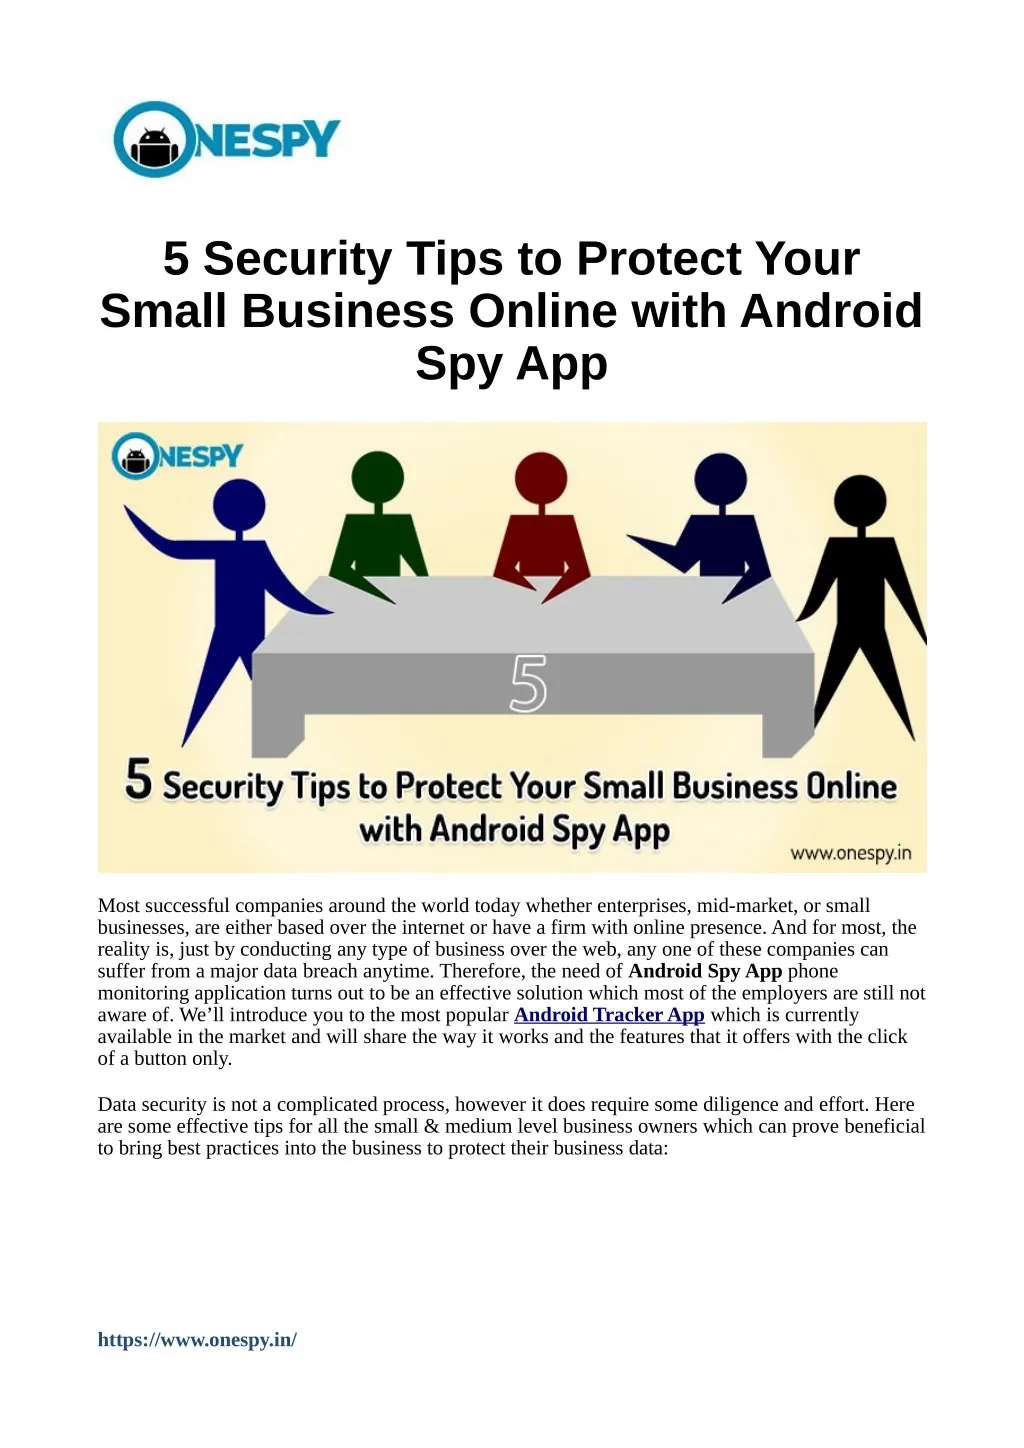 5 security tips to protect your small business